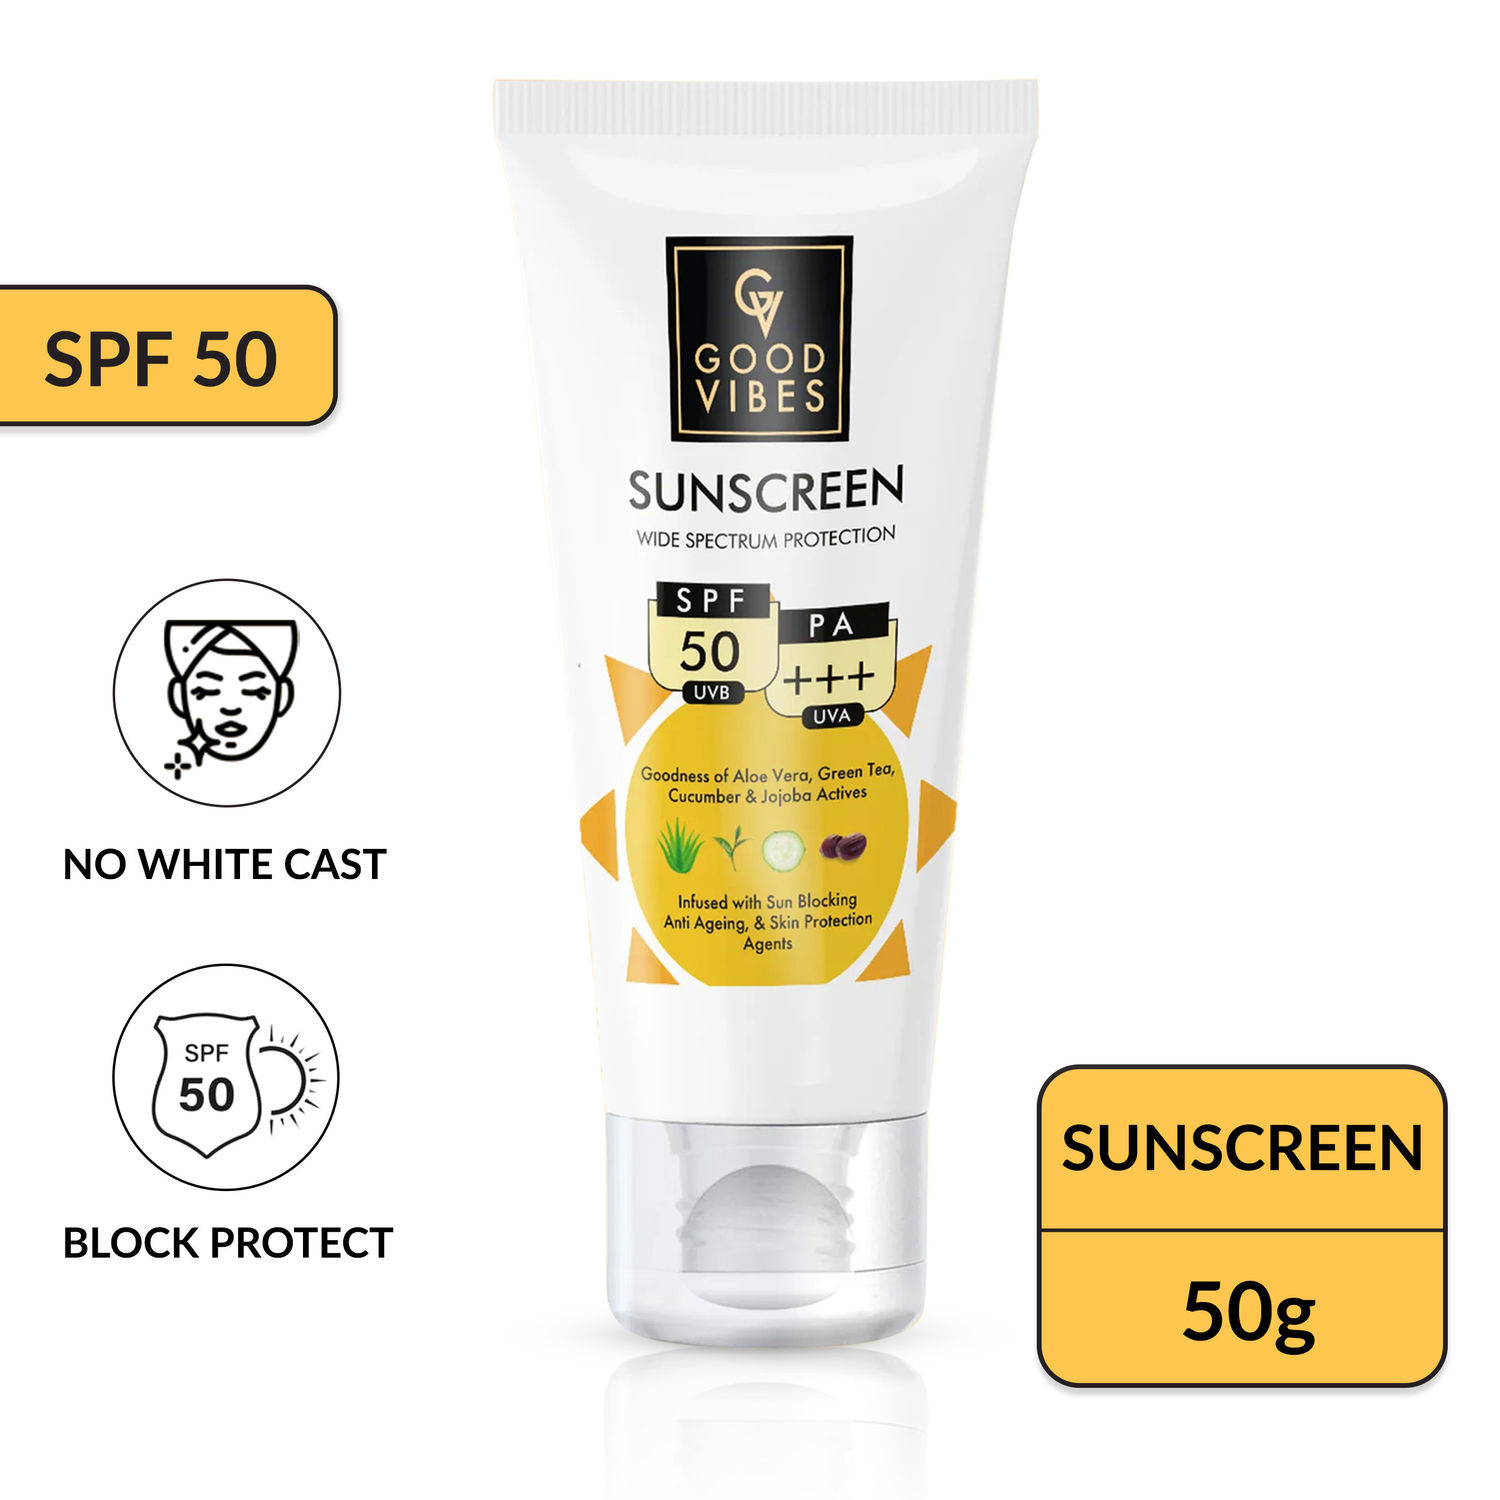 Good Vibes Wide Spectrum Protection Sunscreen with SPF 50 | With Aloe Vera, Cucumber, Green Tea & Jojoba | Non-Greasy, For All Skin Types | 50 g